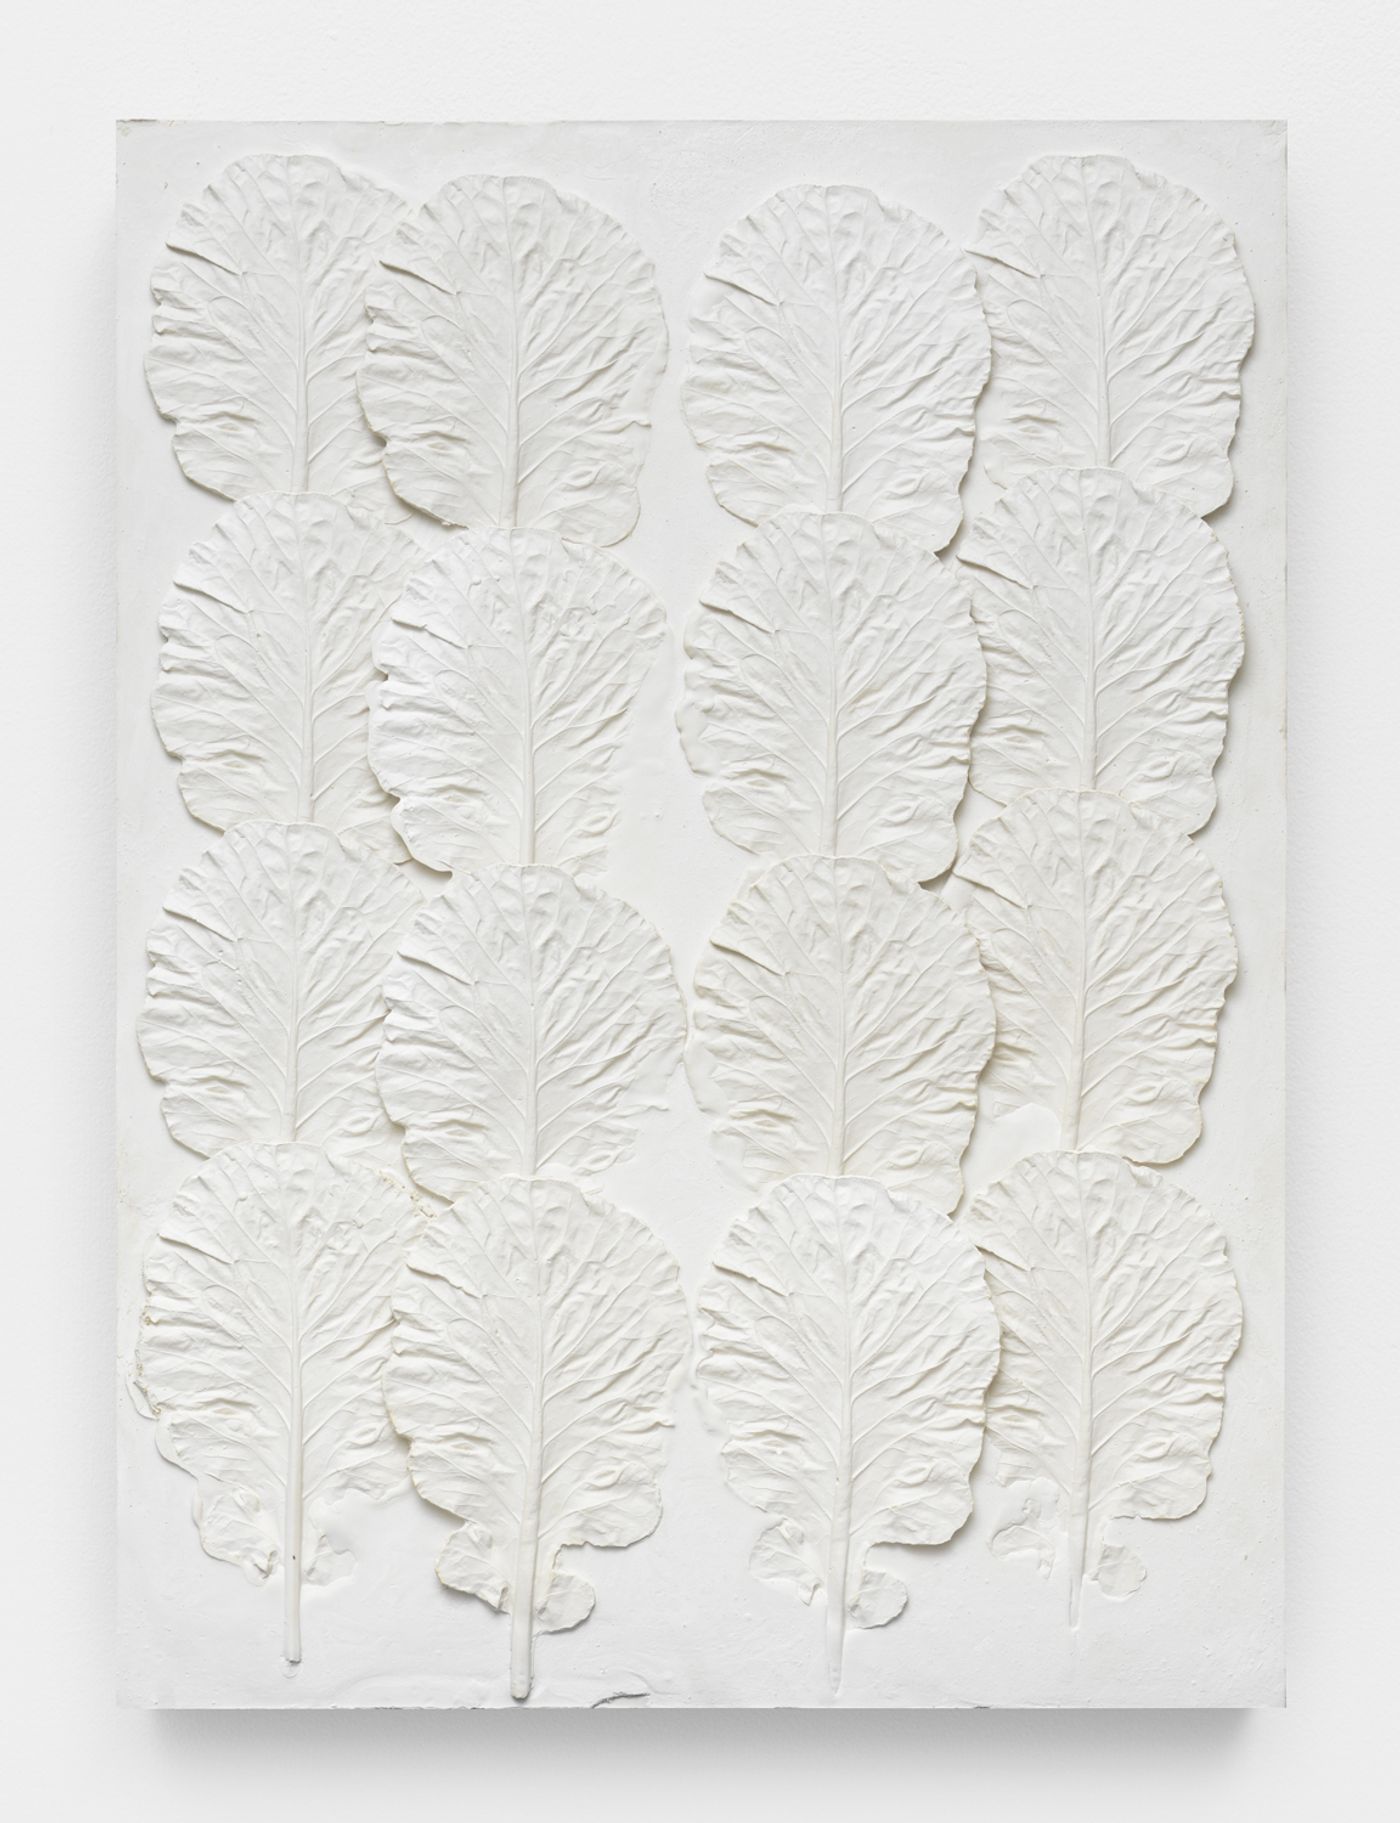 Image of Collard Greens Coverall Composition No.1, 2022: Plaster